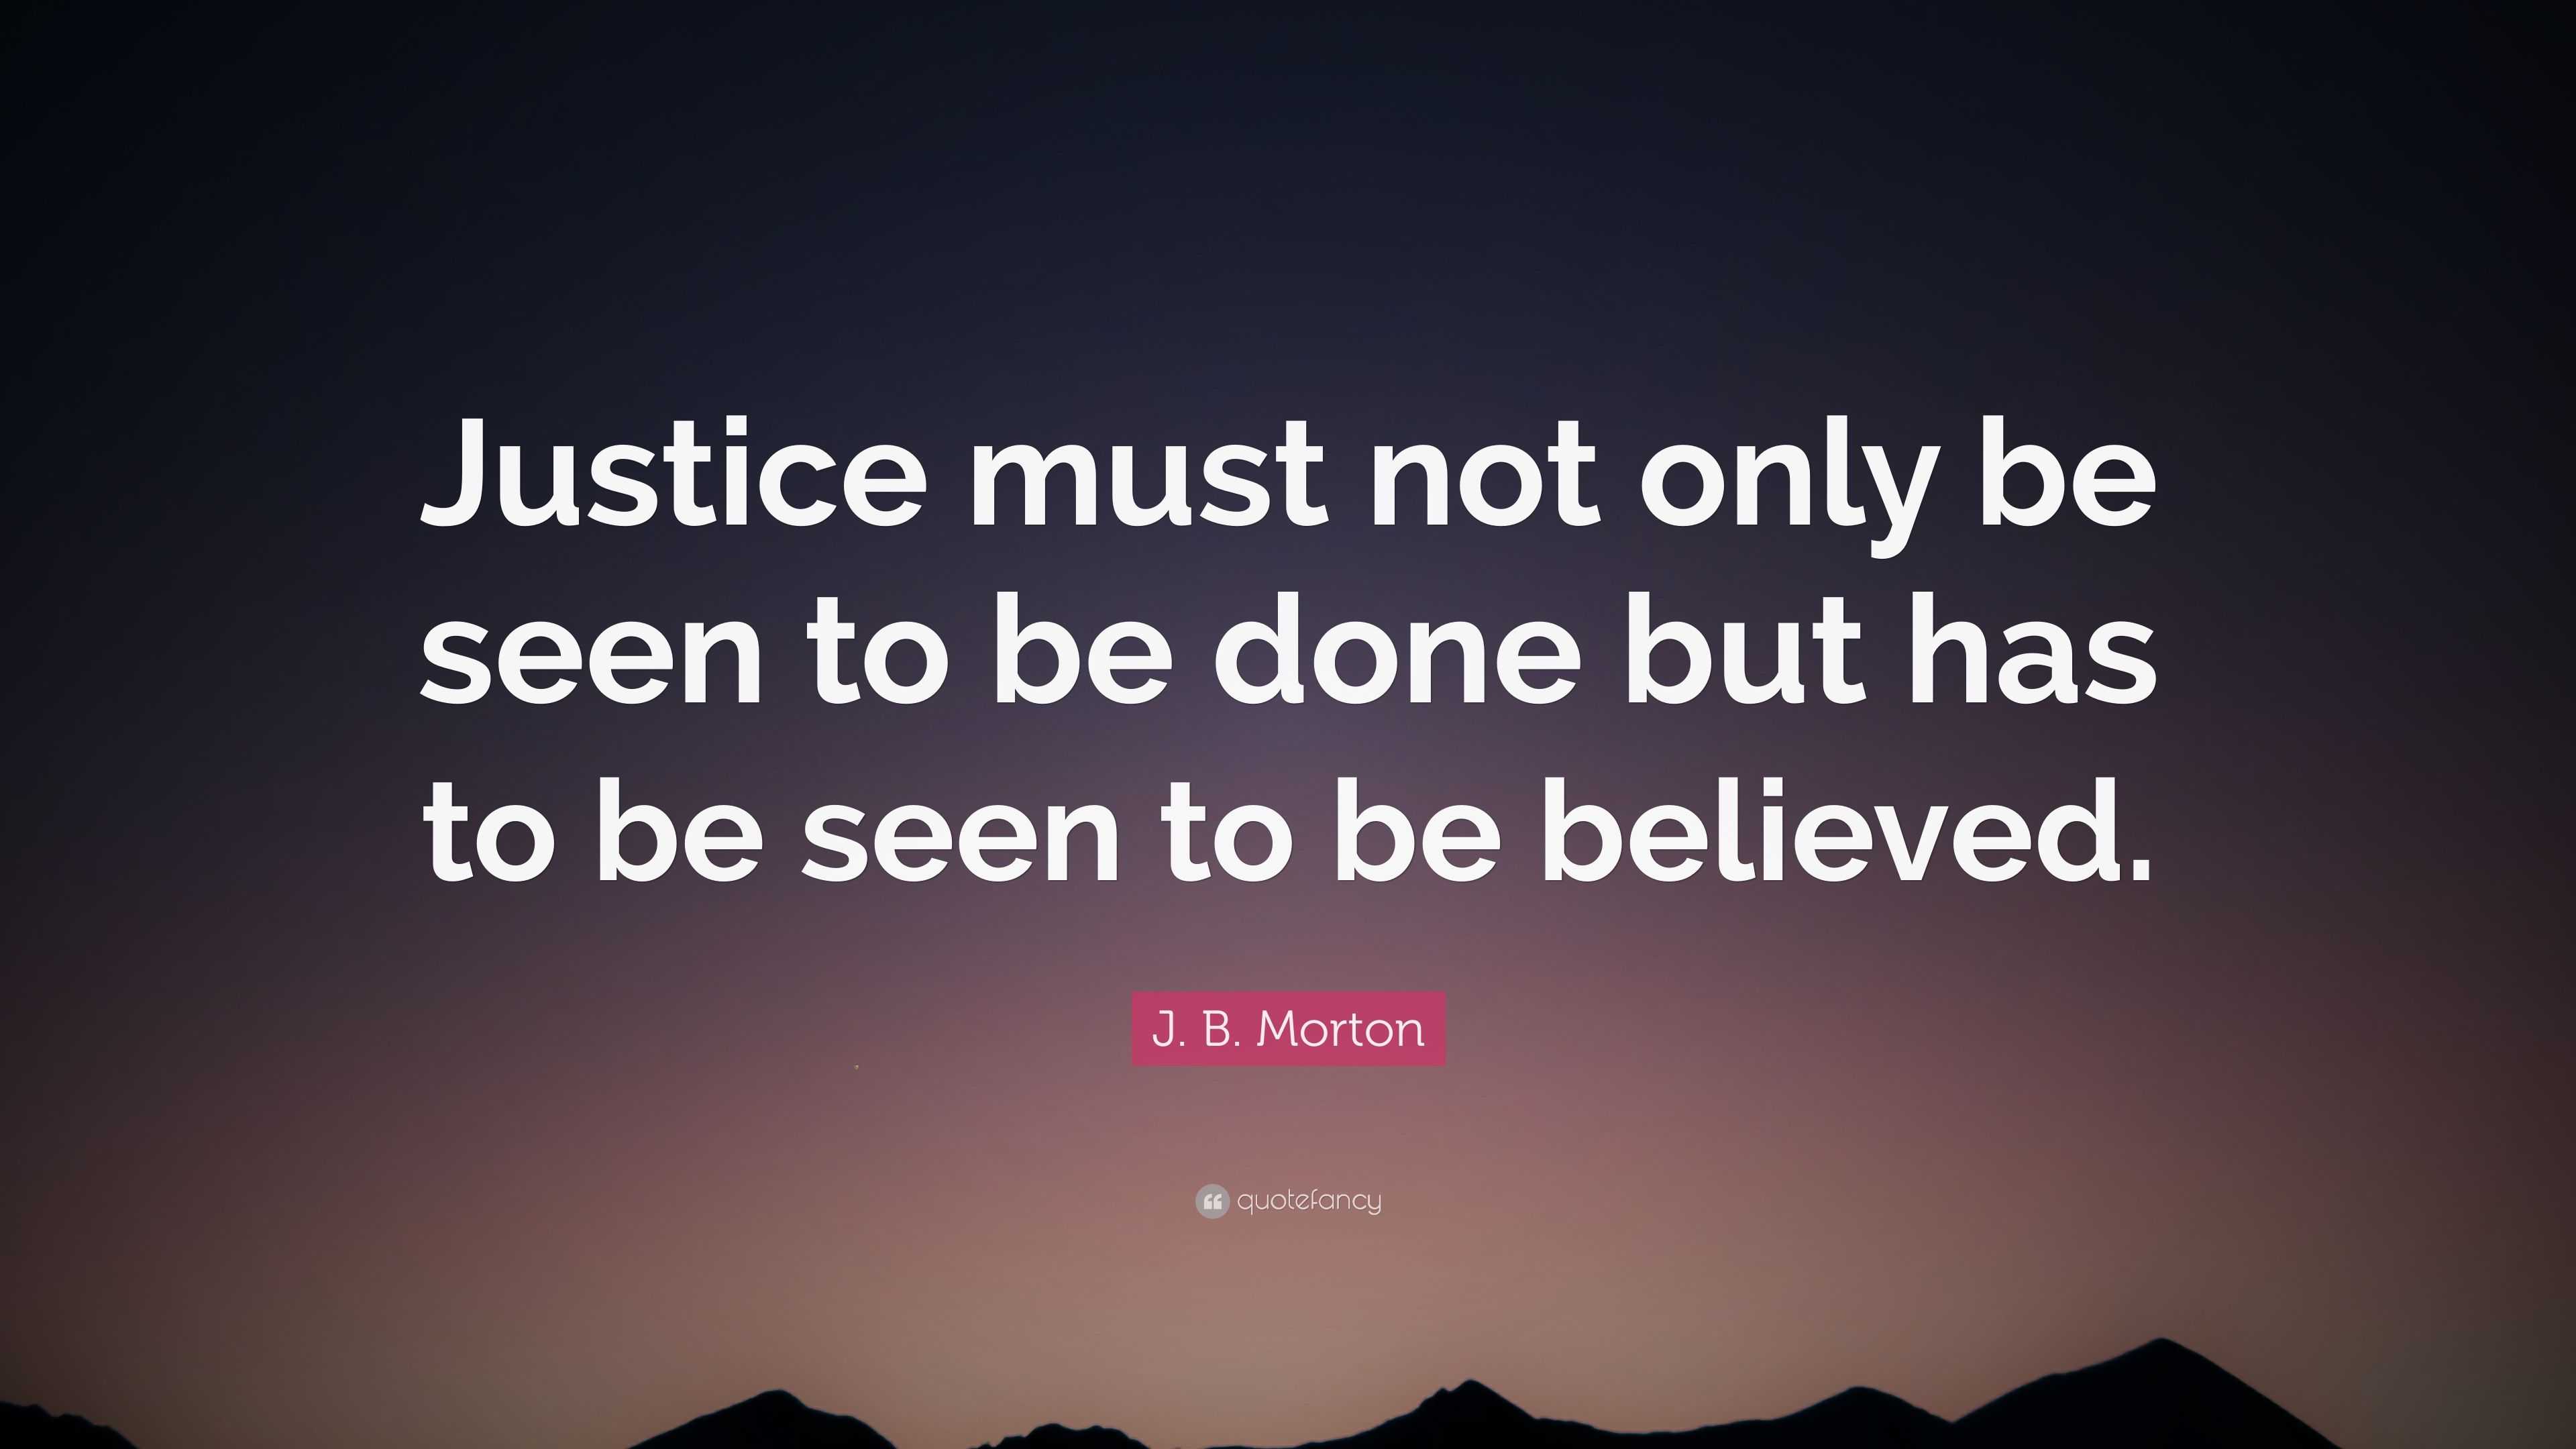 J. B. Morton Quote: “Justice must not only be seen to be done but has to be